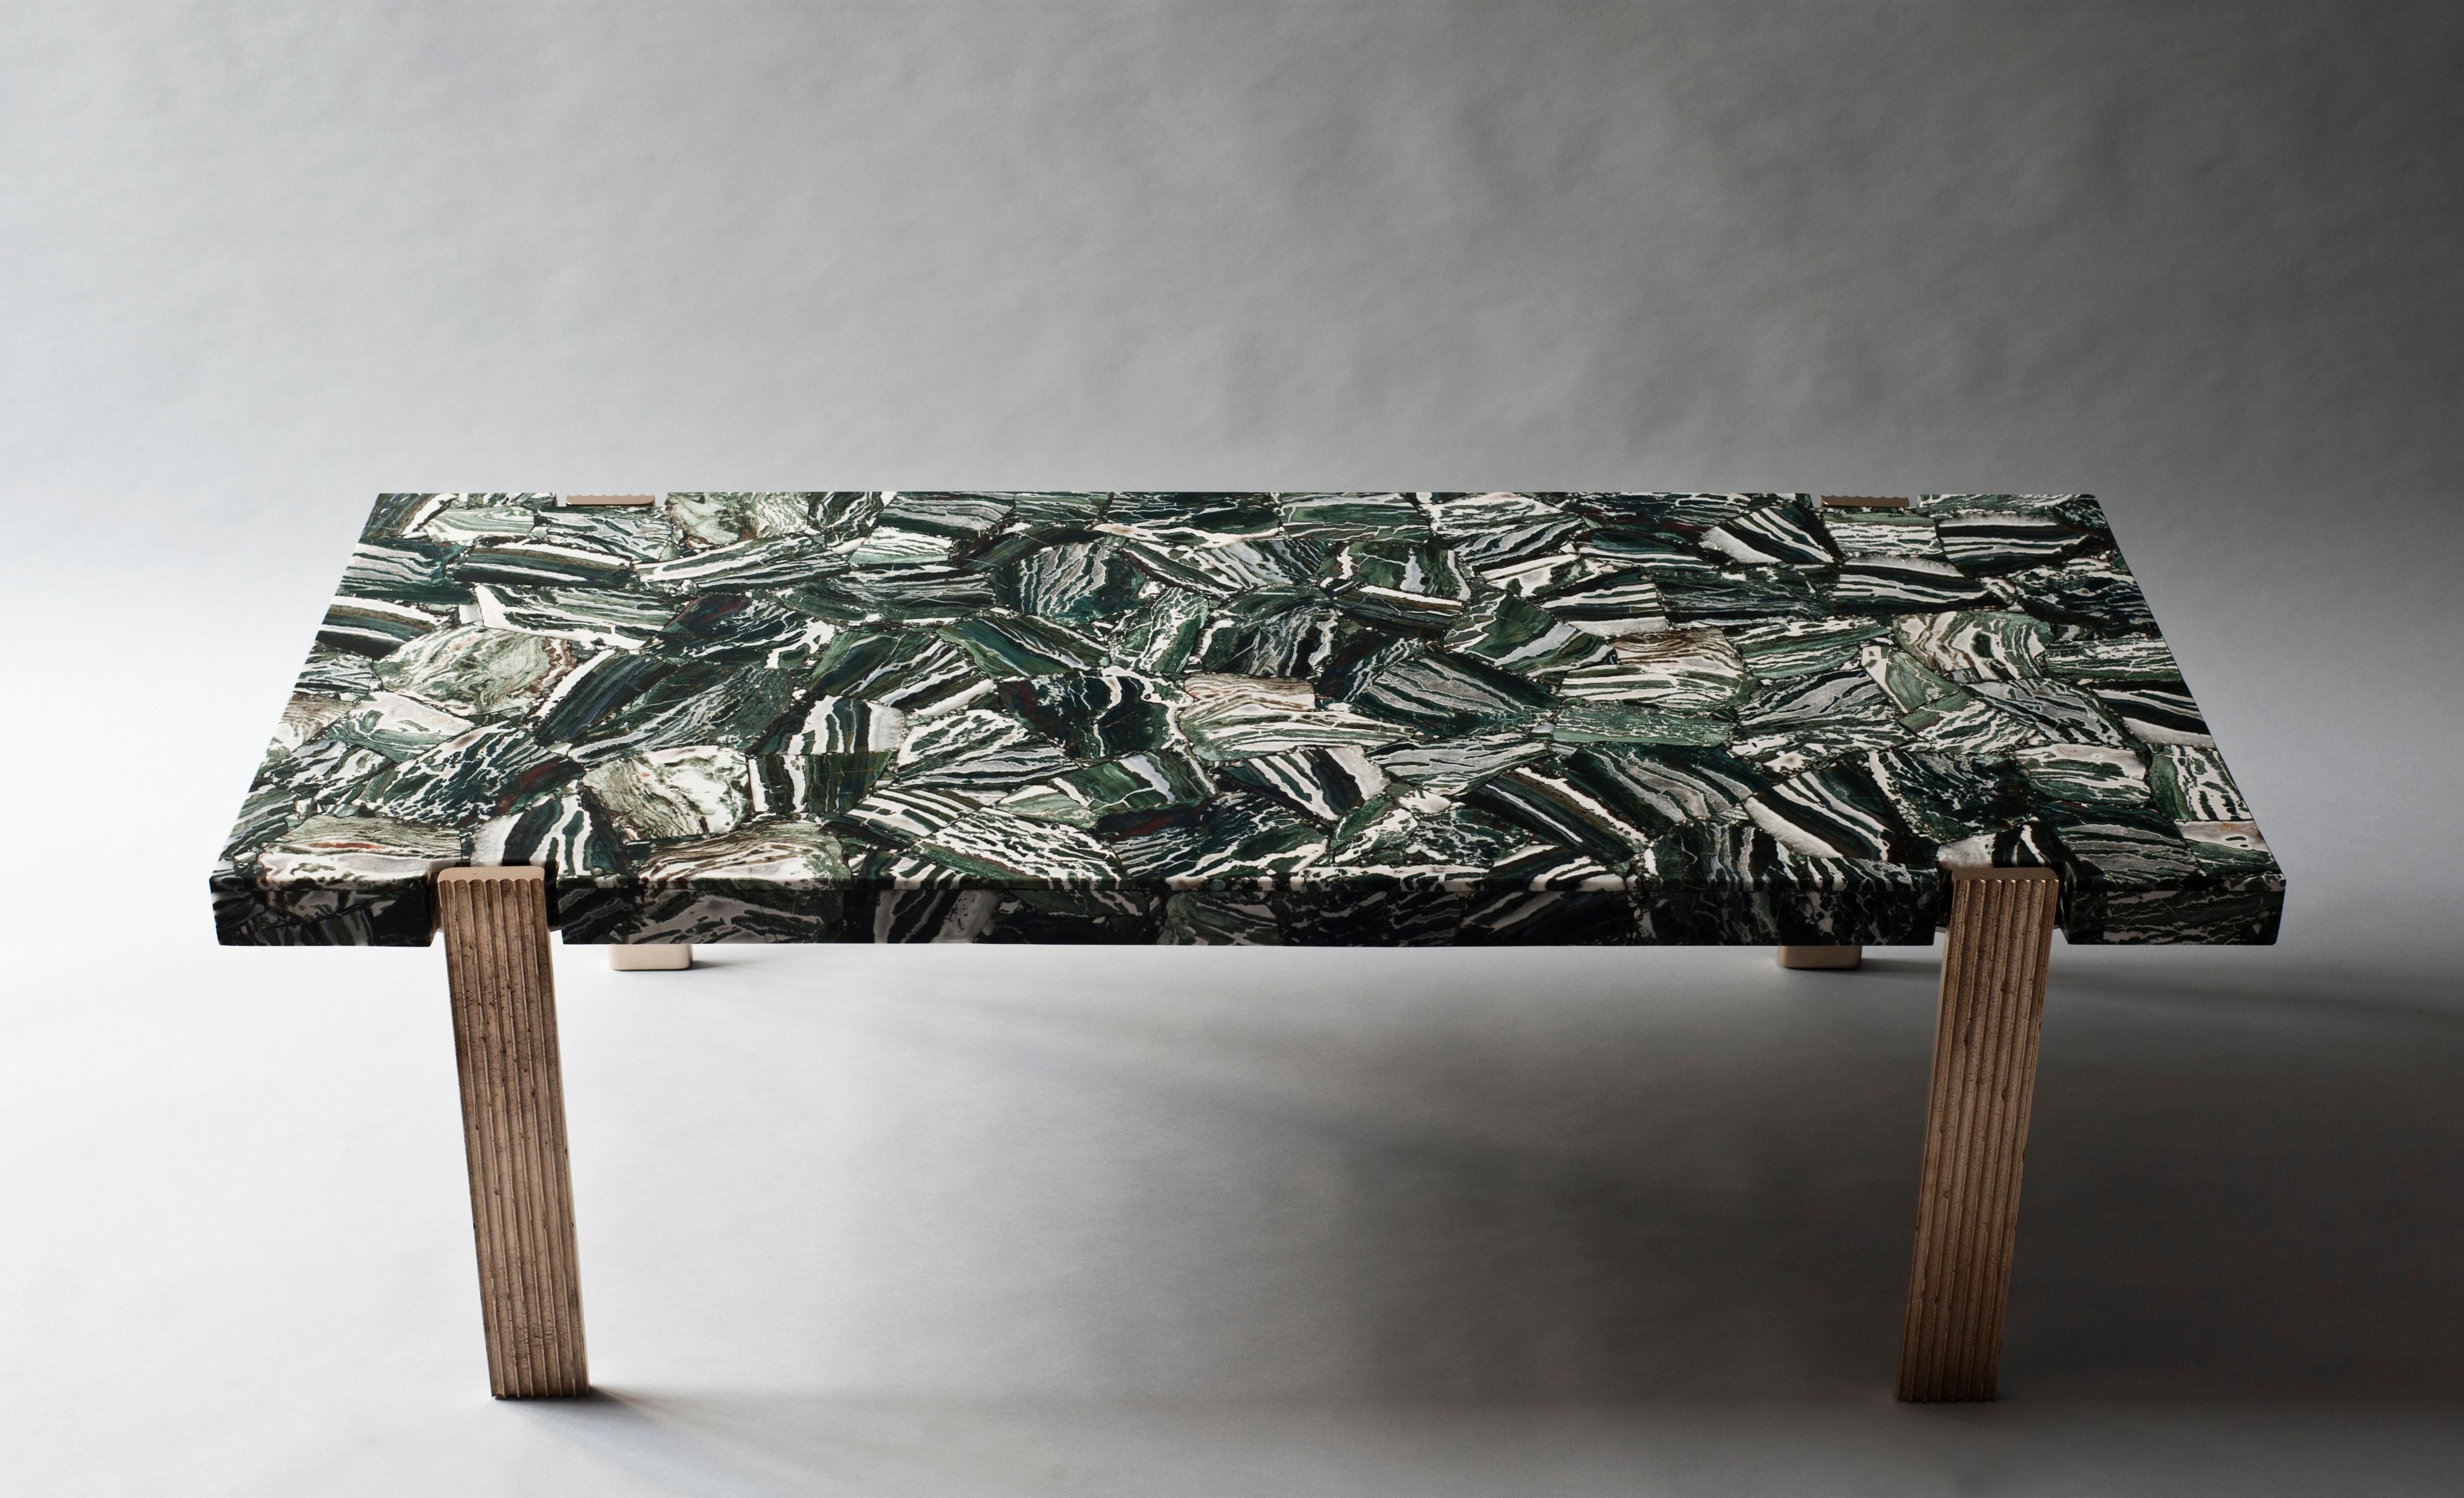 Capital coffee table by DeMuro Das.
Dimensions: W 135 x D 60 x H 43 cm.
Materials: Agate (Green Zebra ) - polished (random) tabletop
 Solid bronze (Antique) legs

 Dimensions and finishes can be customized.

DeMuro Das is an international